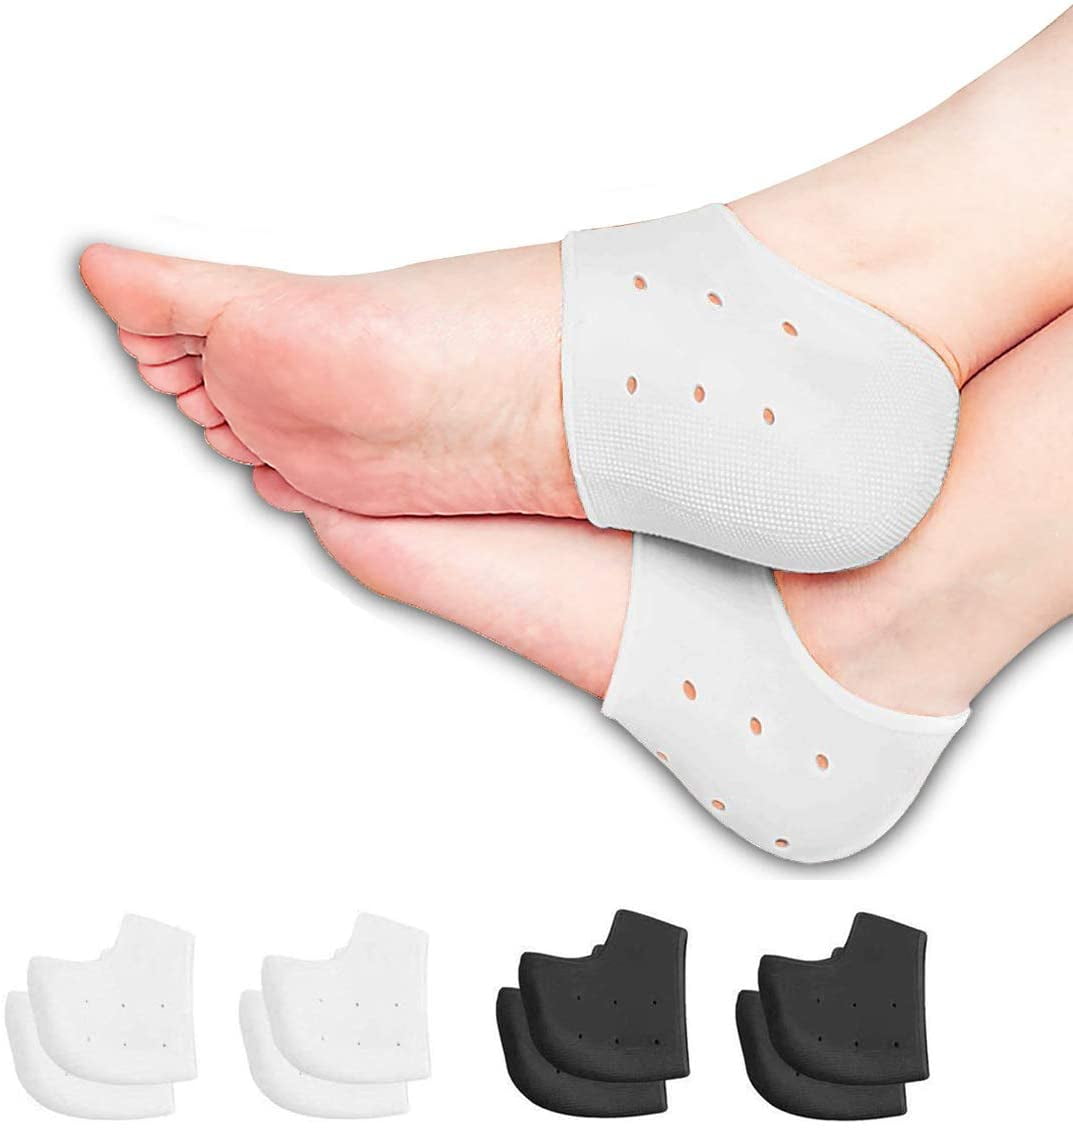 PEDIMEND™ Silicone Gel Cracked Heel Protector Cushion Cup 3PAIR Unisex Foot Care 